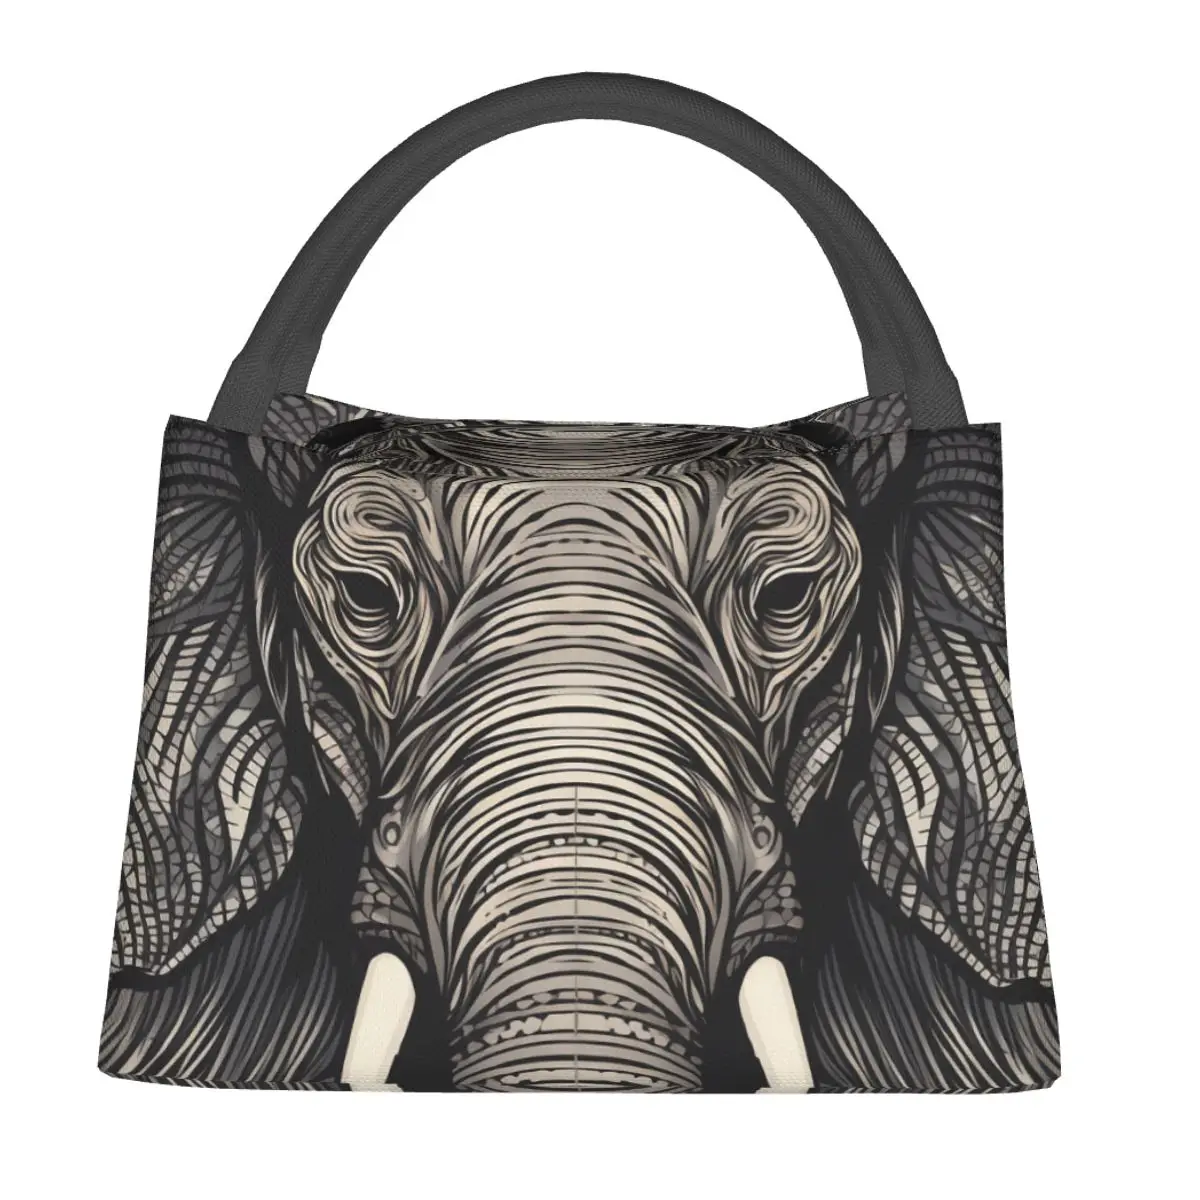 

Elephant Lunch Bag For Adult Psychedelic Lines Portraits Print Lunch Box Casual School Cooler Bag Waterproof Tote Food Bags